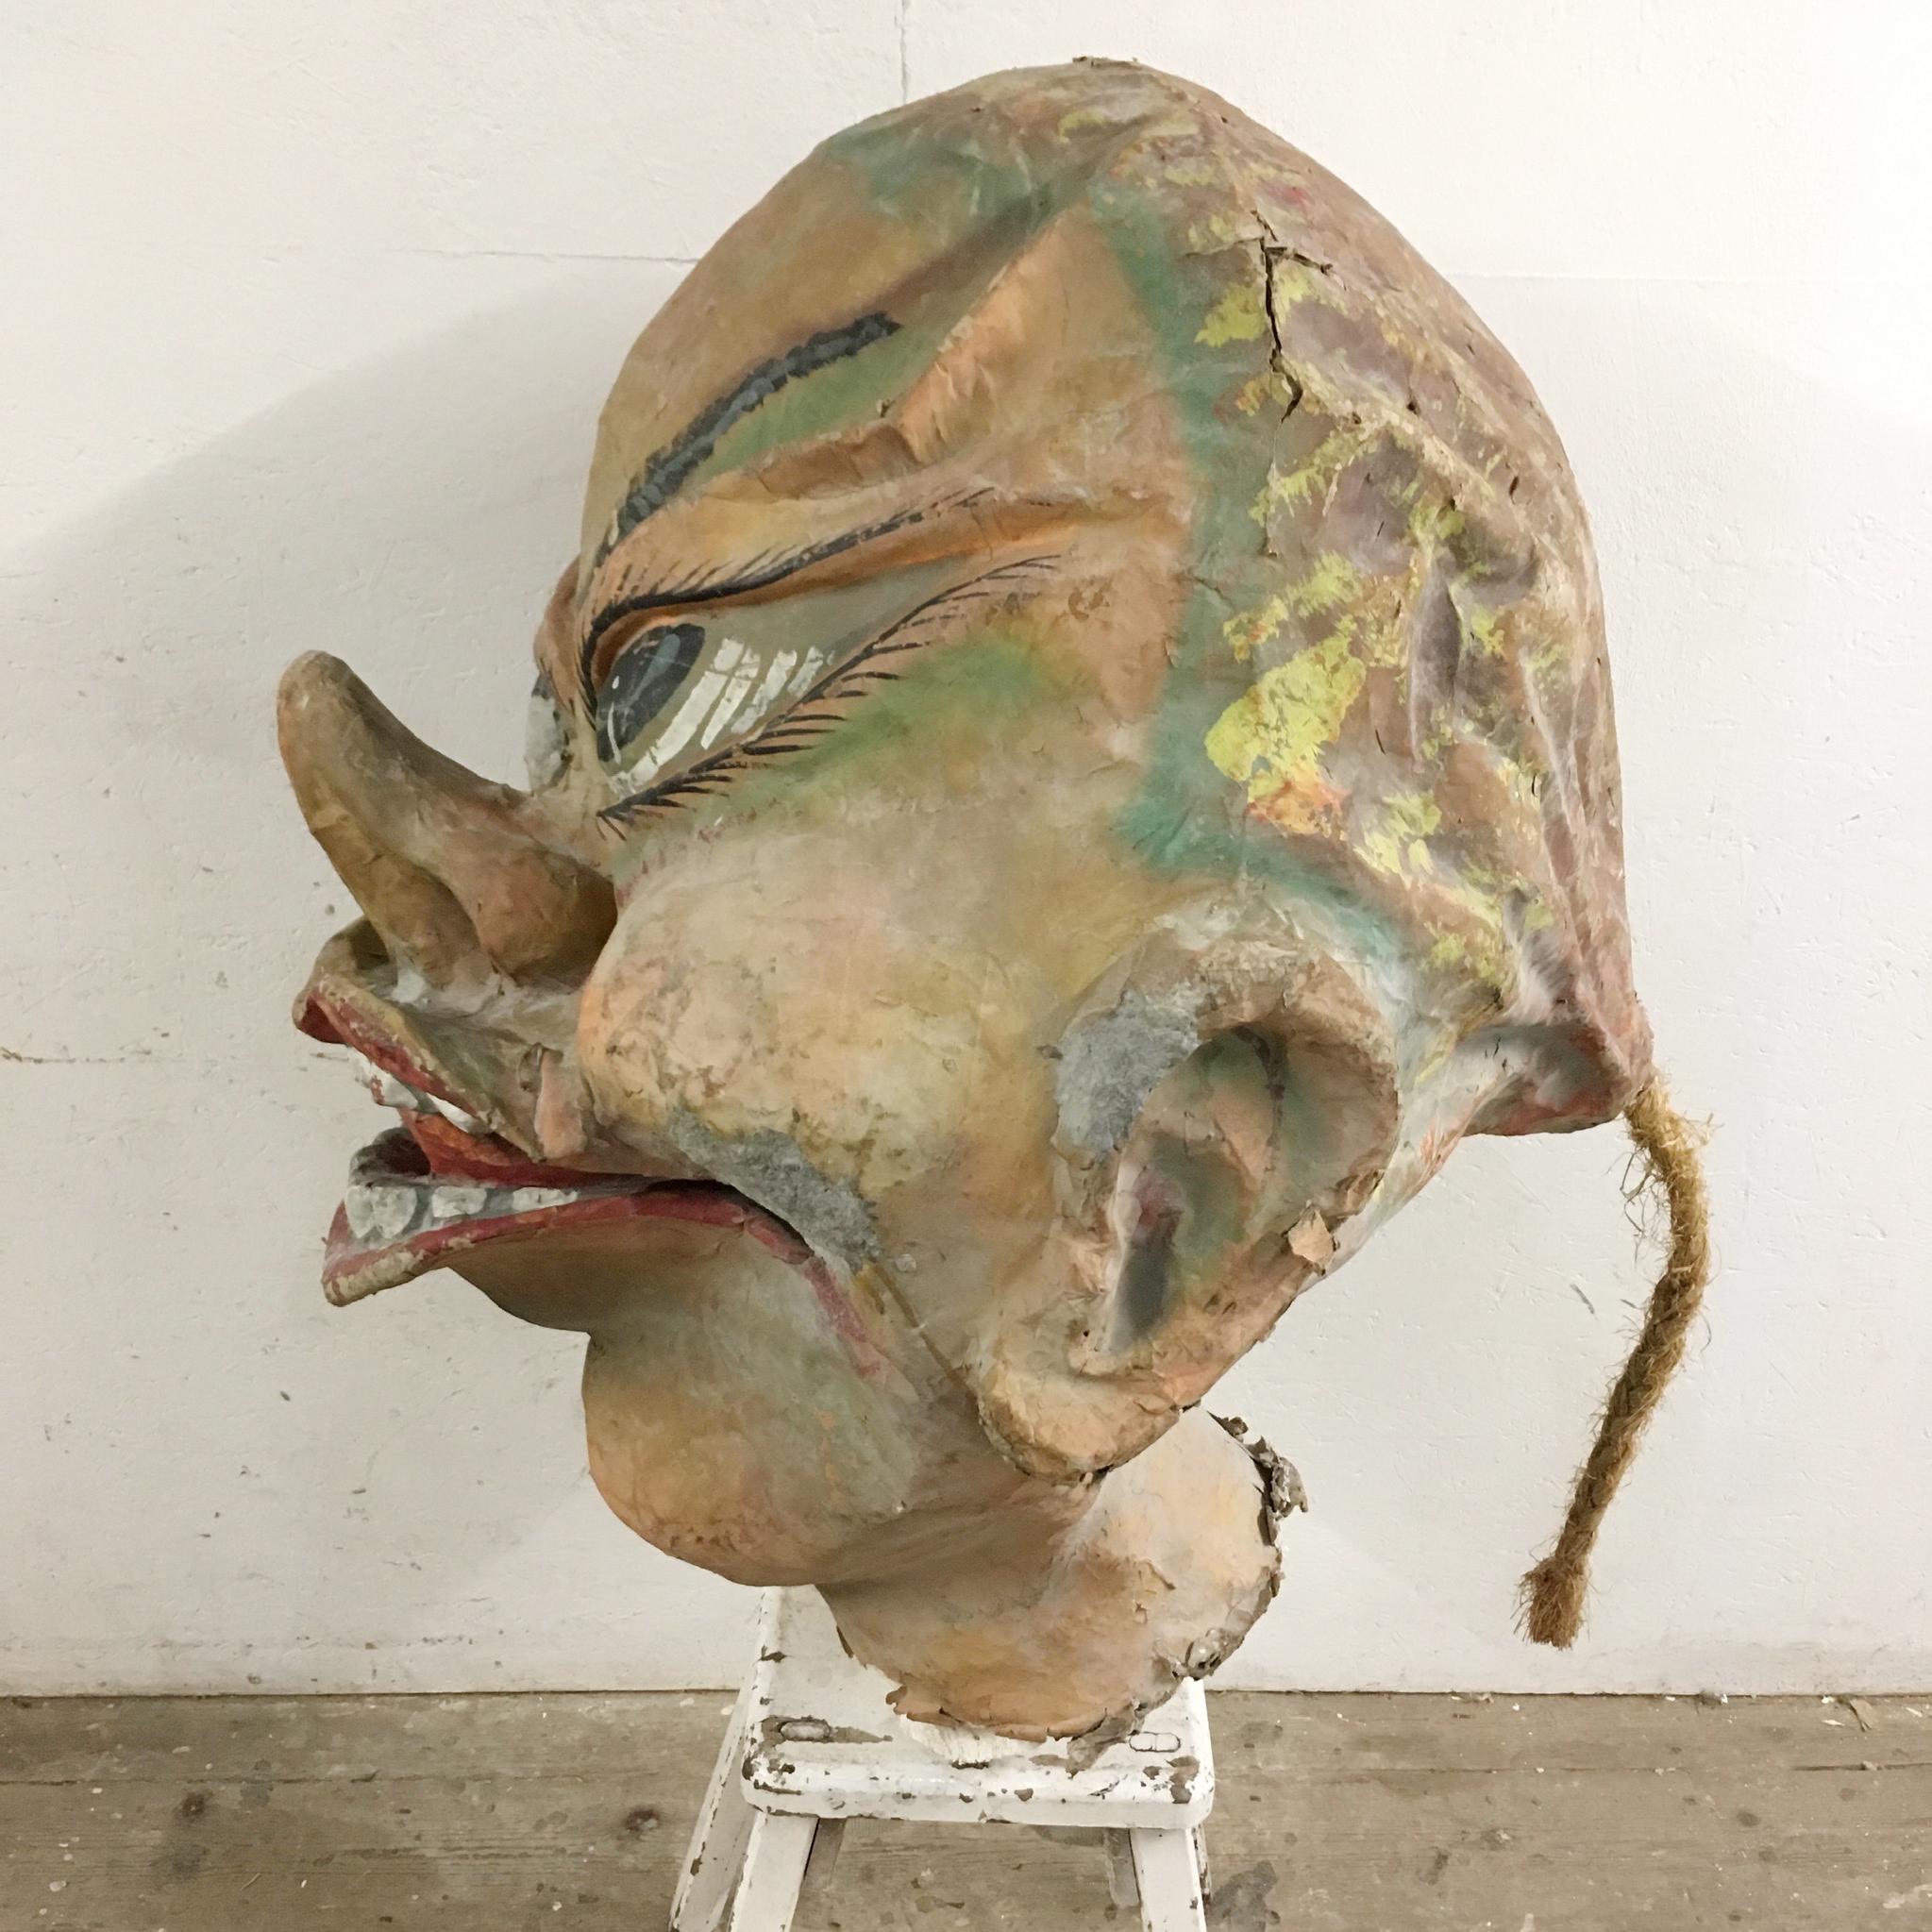 Huge papier mâché carnival 'Big Head'

Handmade vintage carnival parade head

circa 1950s

In good condition for age

Dimensions Are as close as possible, a very awkward shape to measure

Measures: 93 cm Height
80 cm Width
97 cm